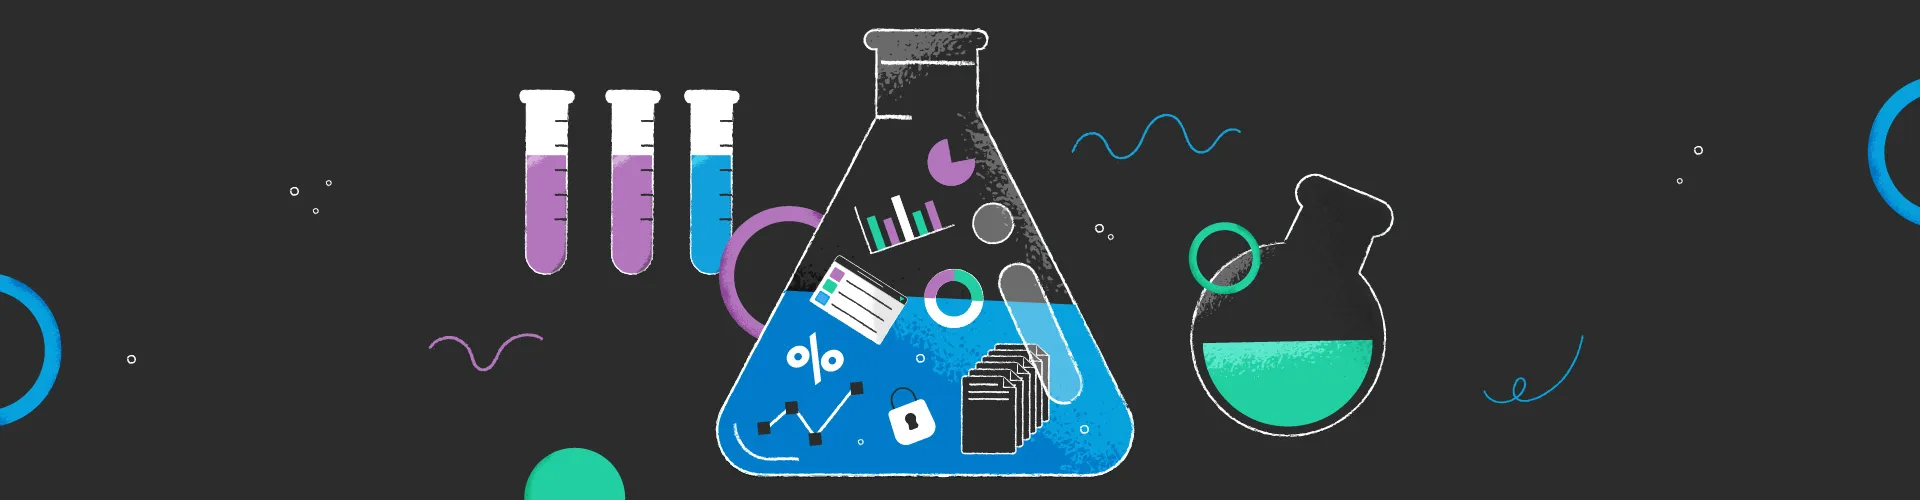 How Can Big Data Simplify Pharmaceutical Data Management Processes? Big Data in Pharma